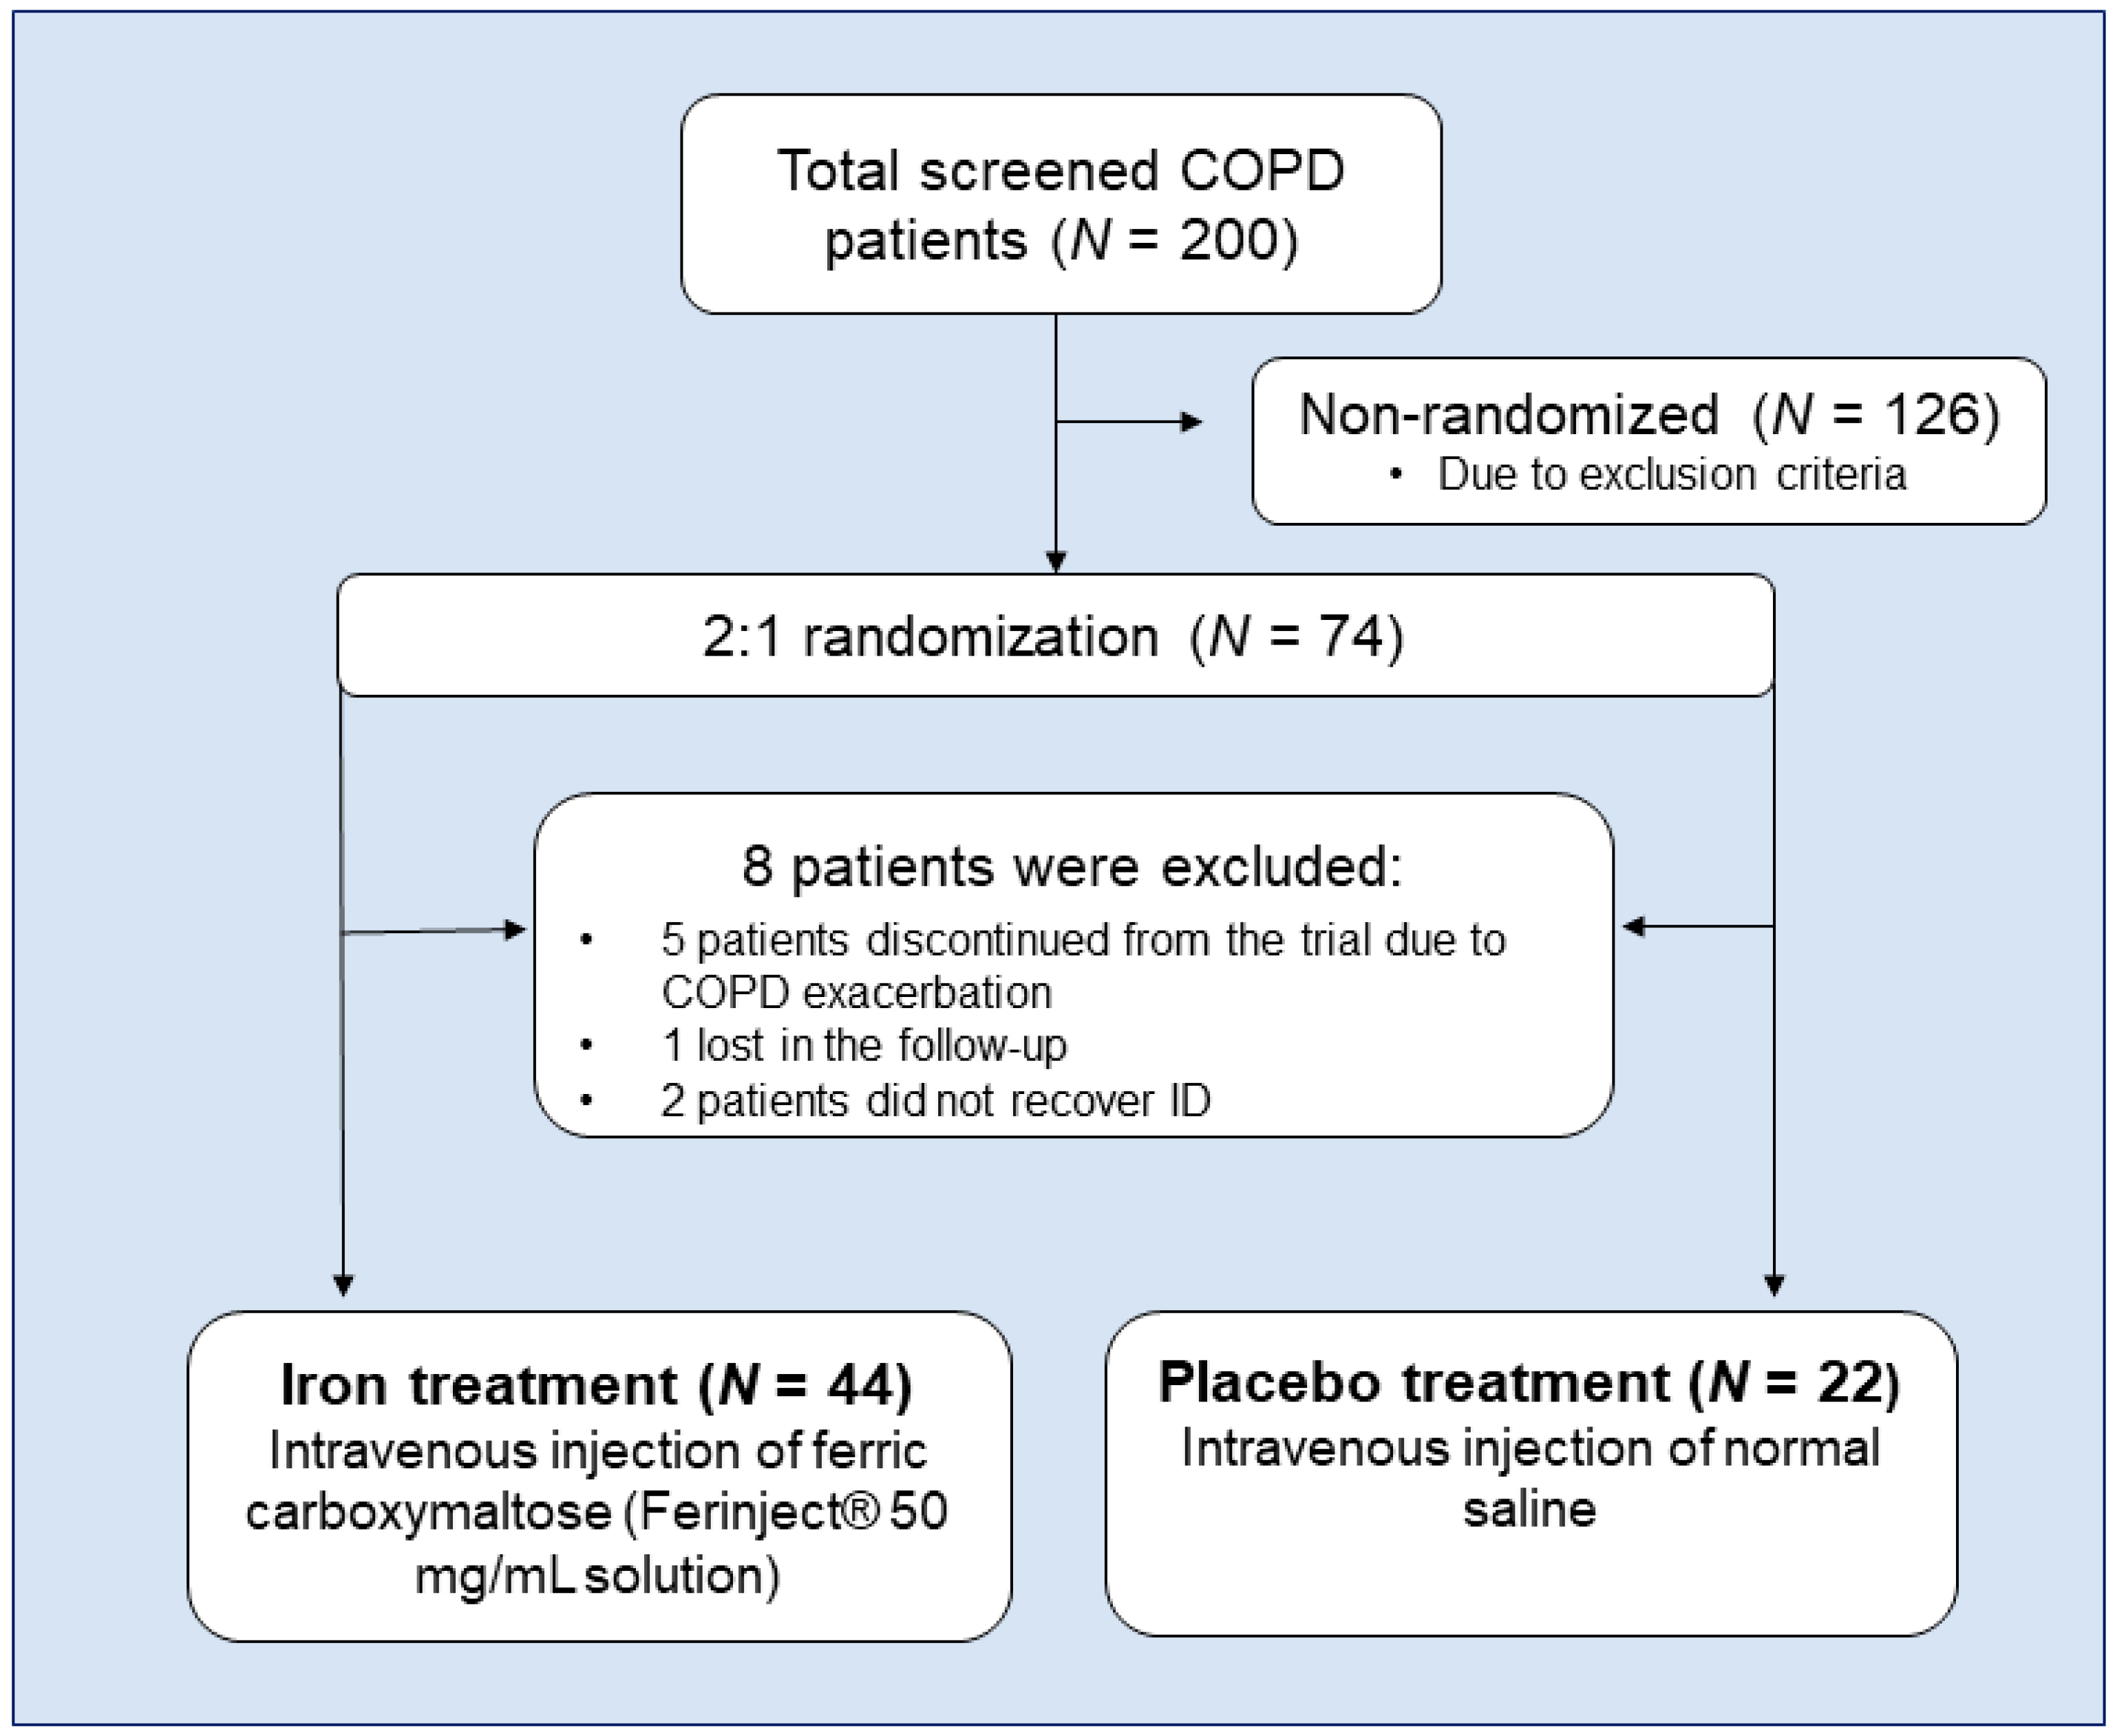 Biomedicines | Free Full-Text | Iron Replacement and Redox Balance in  Non-Anemic and Mildly Anemic Iron Deficiency COPD Patients: Insights from a  Clinical Trial